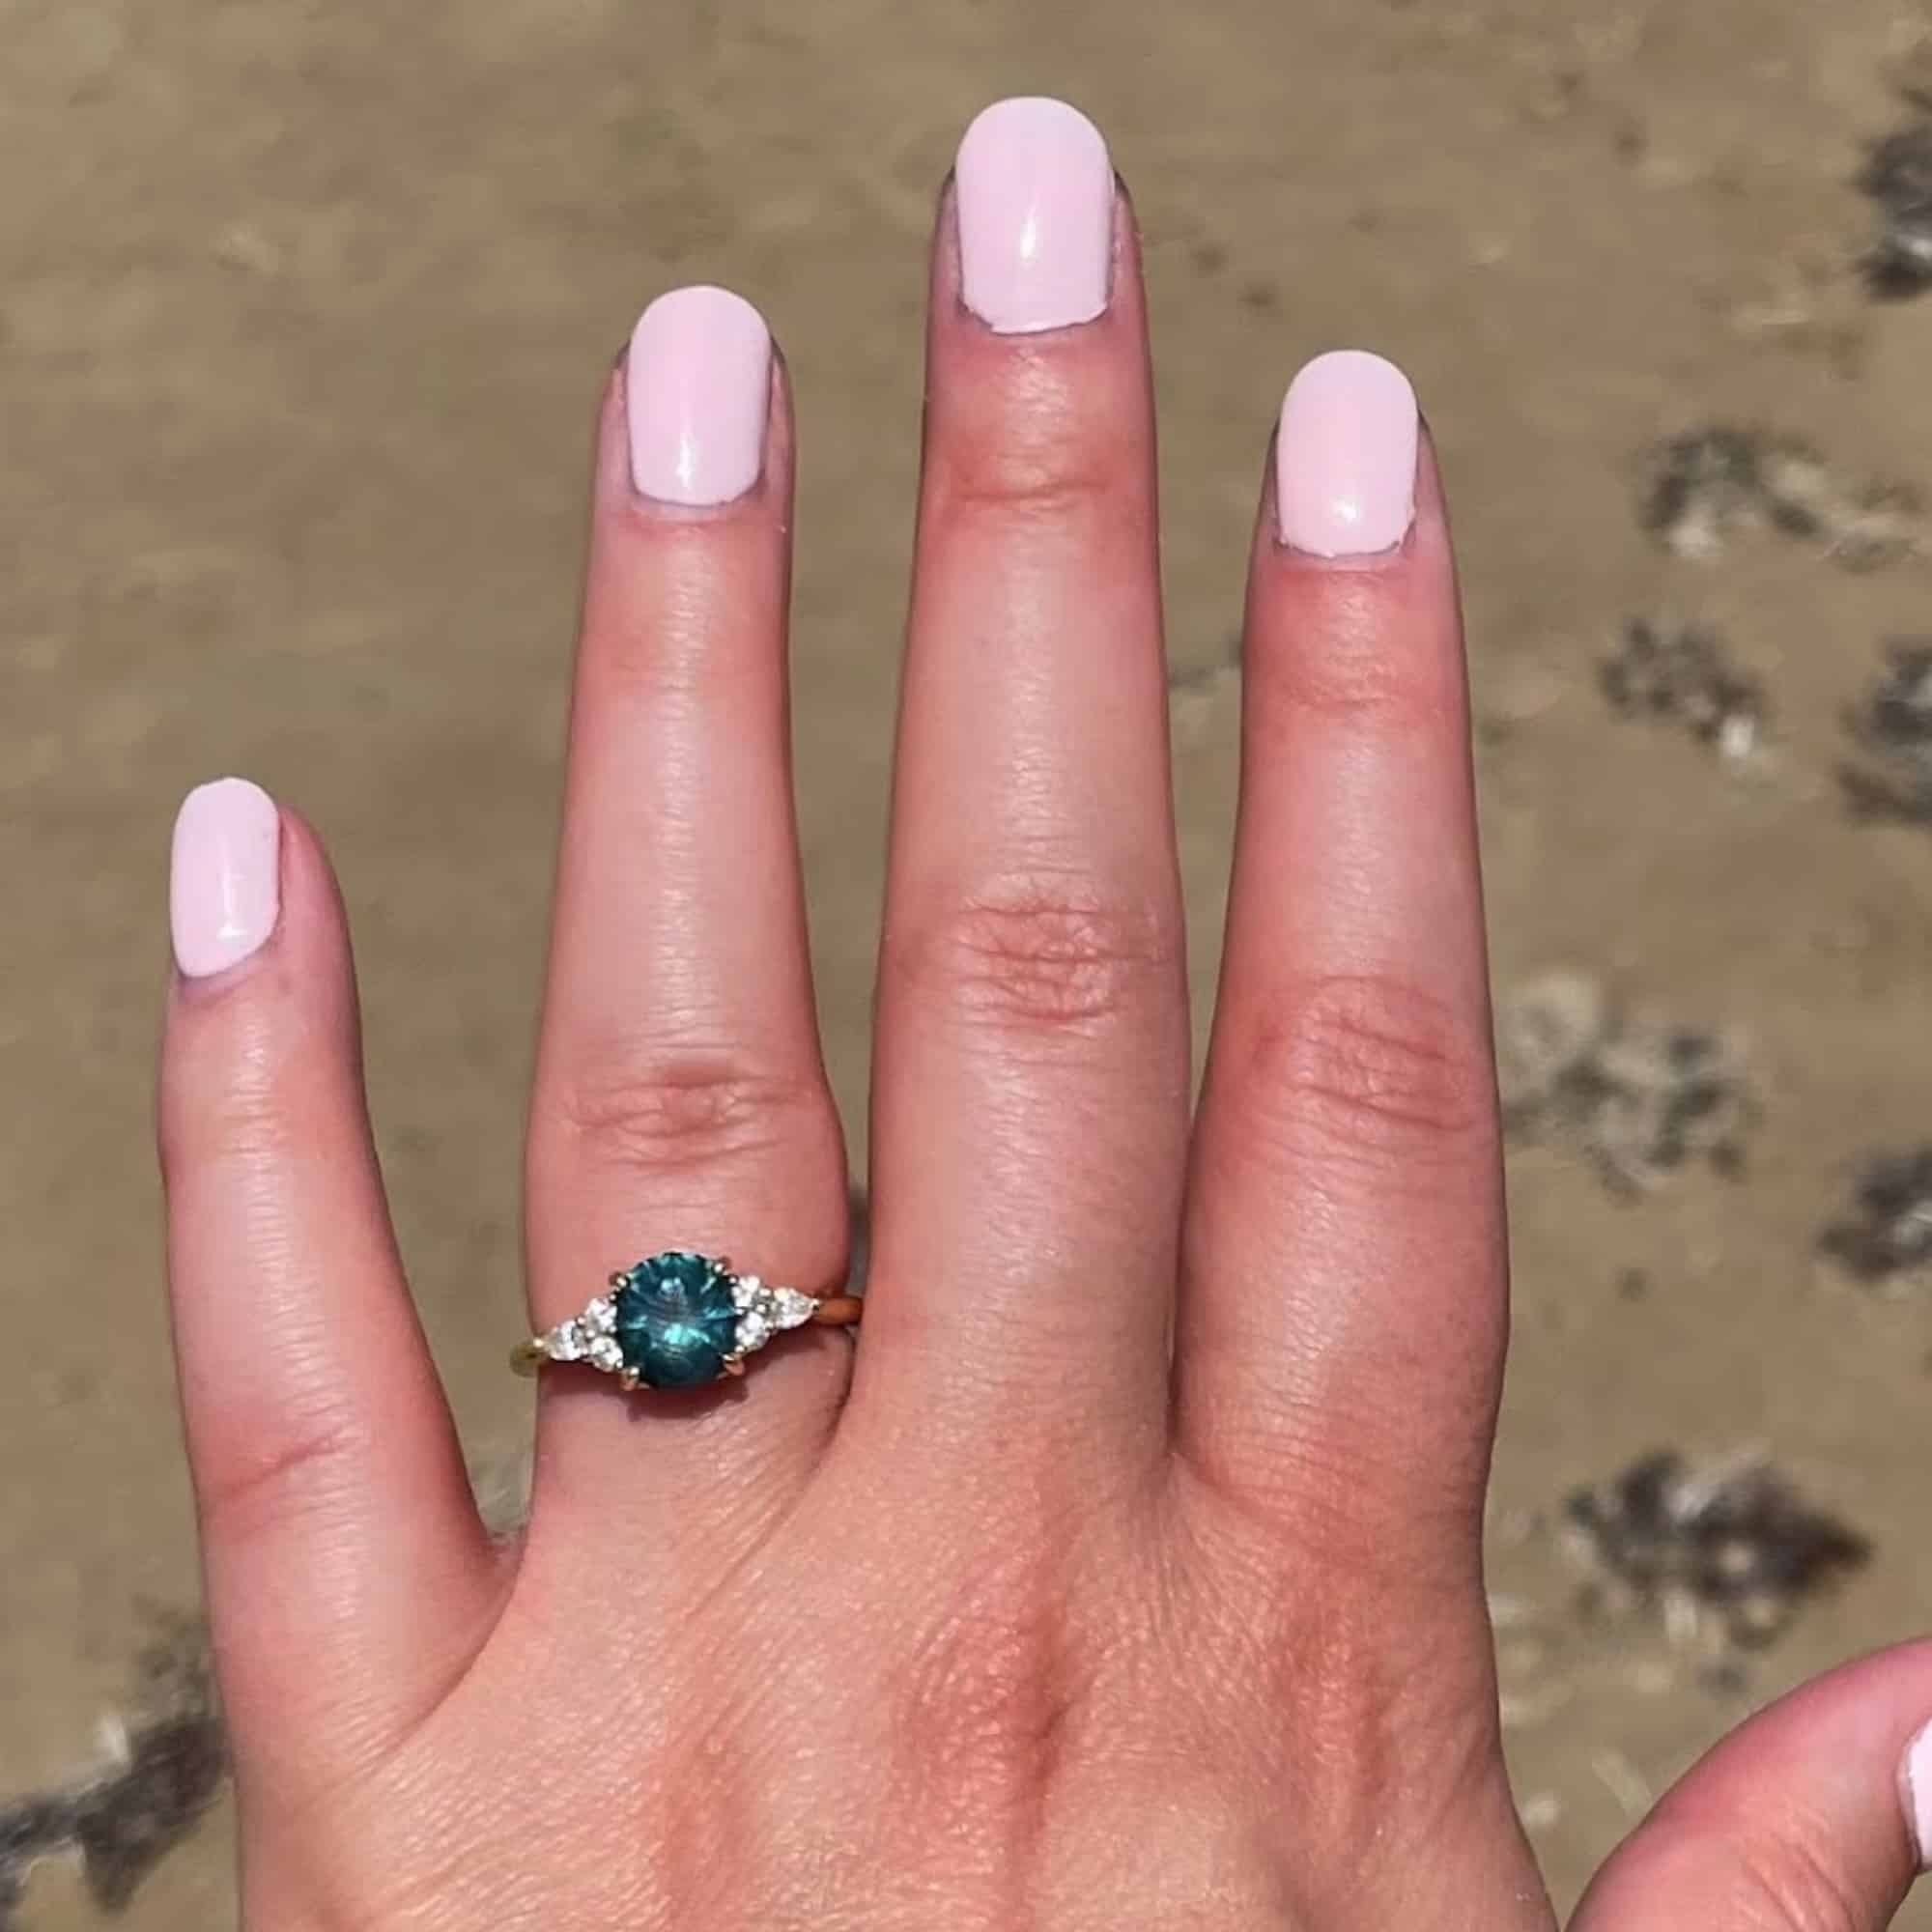 A photo from a customer review featuring a custom cluster ring with a large blue-green oval Montana sapphire on a baby-pink manicured hand against a beach